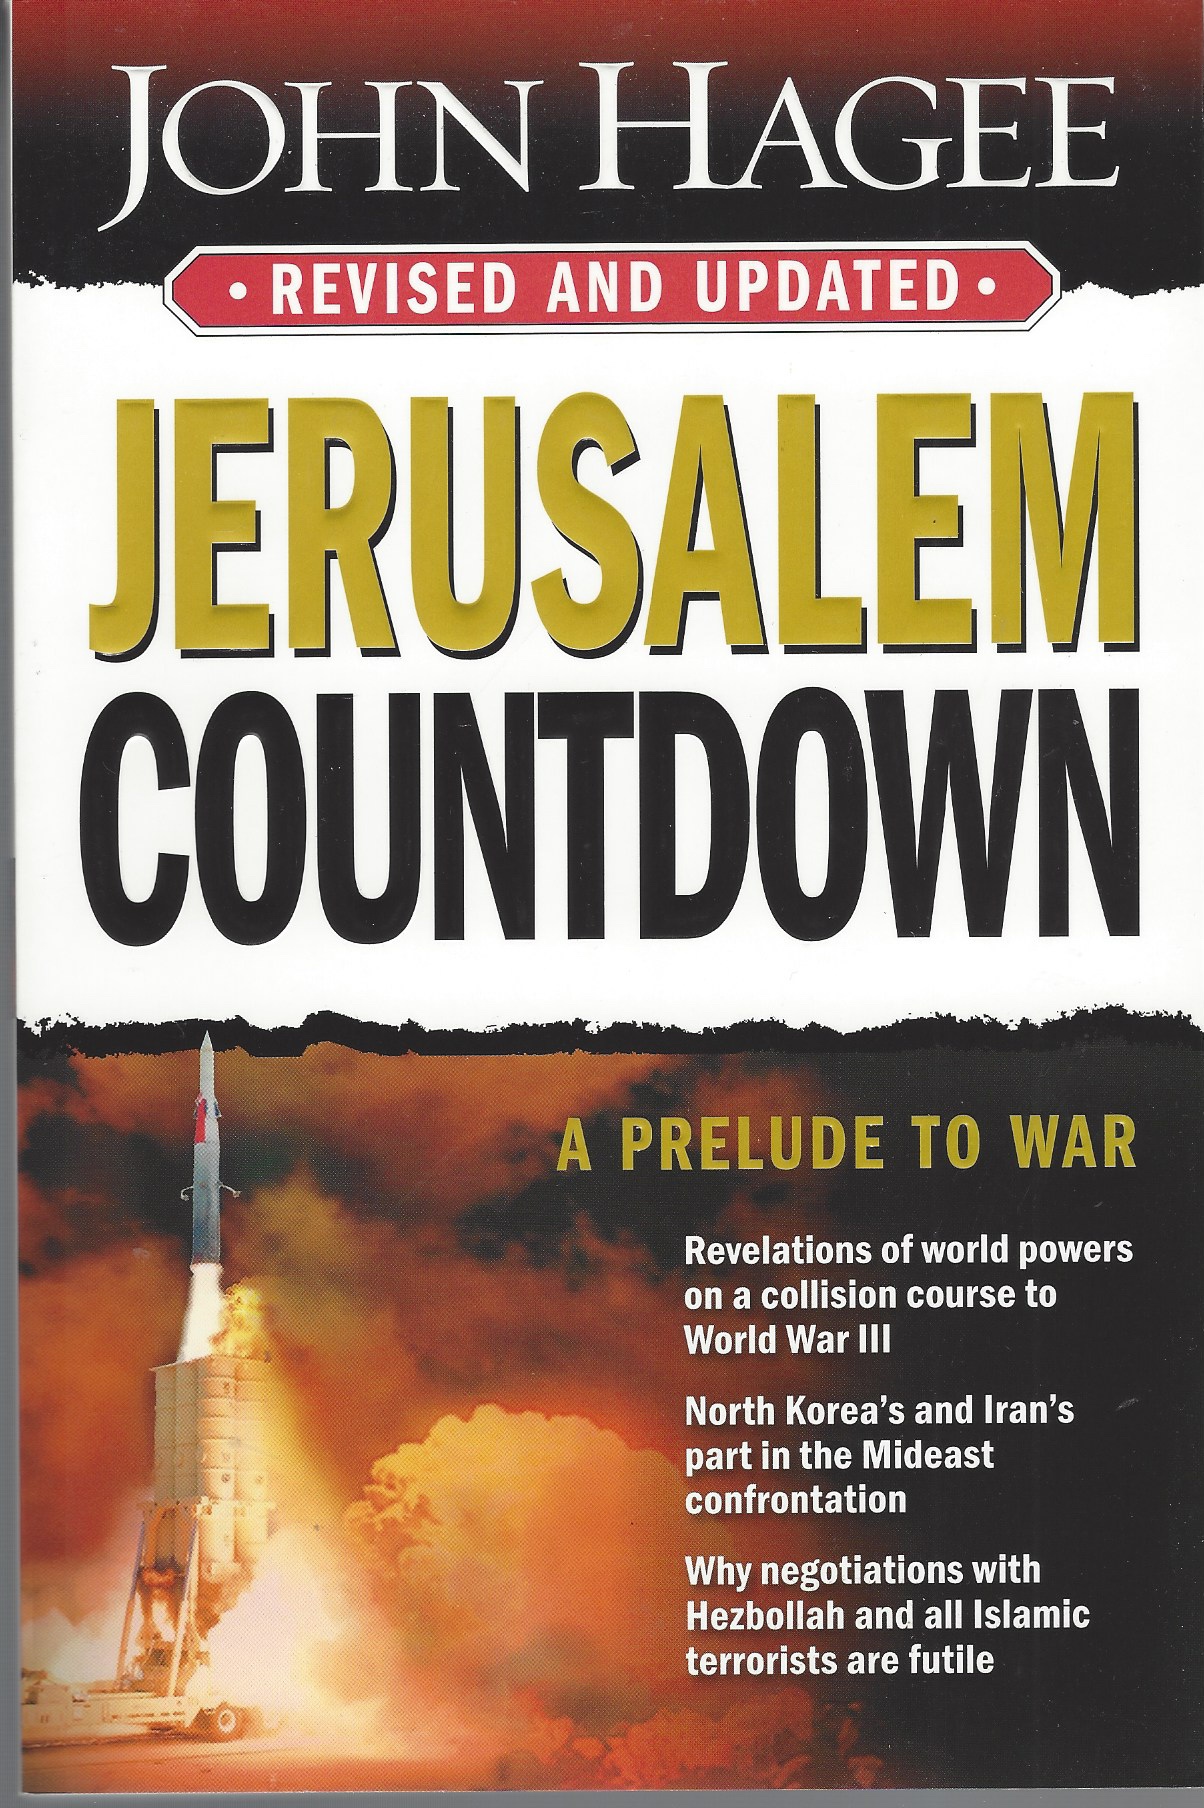 HAGEE, JOHN - Jerusalem Countdown, Revised and Updated a Prelude to War